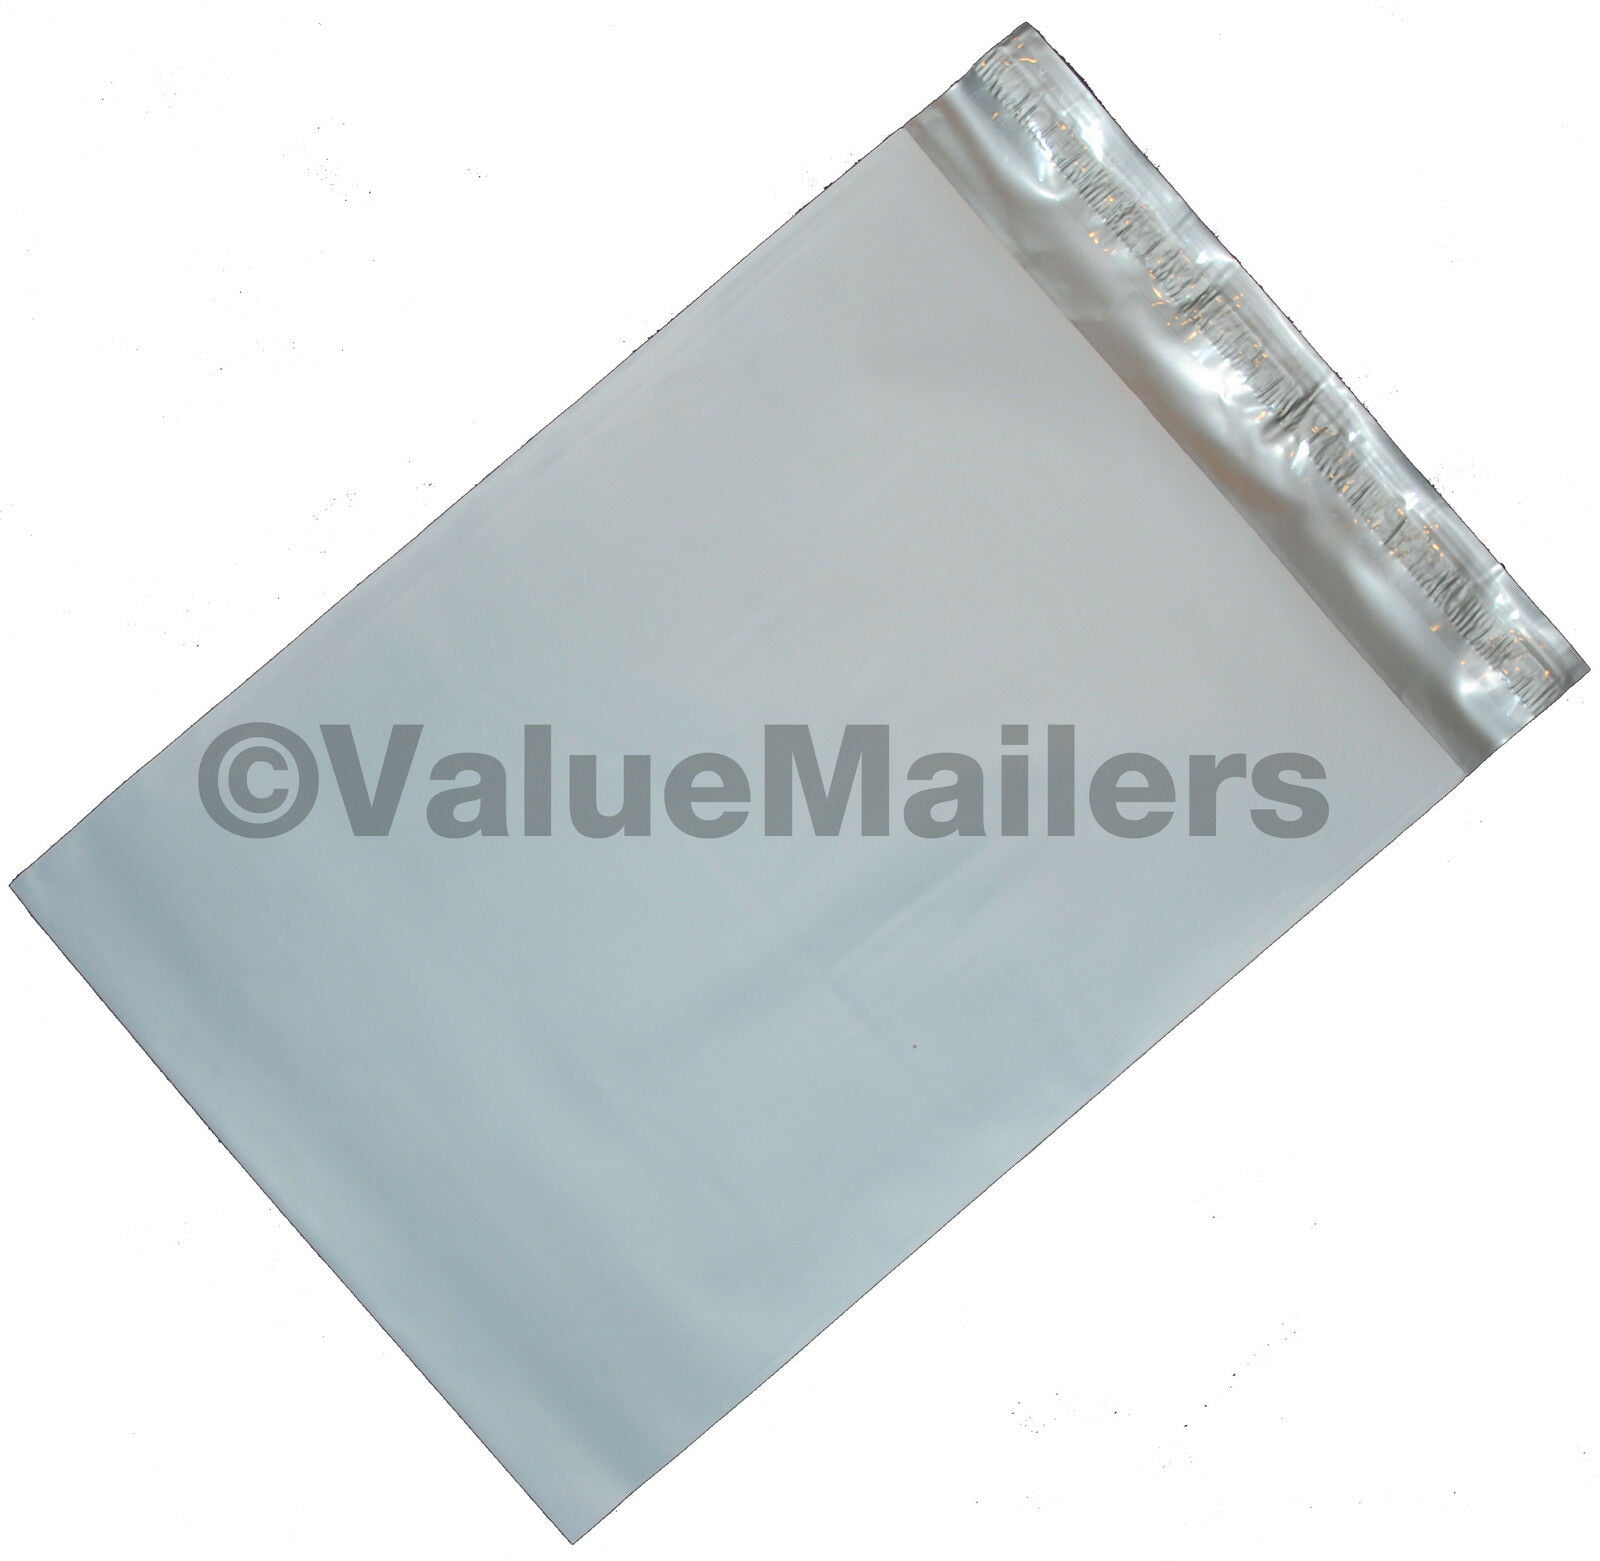 400 14.5x19  White Poly Mailers Shipping Envelopes Self Sealing Bags 2.5 MIL 